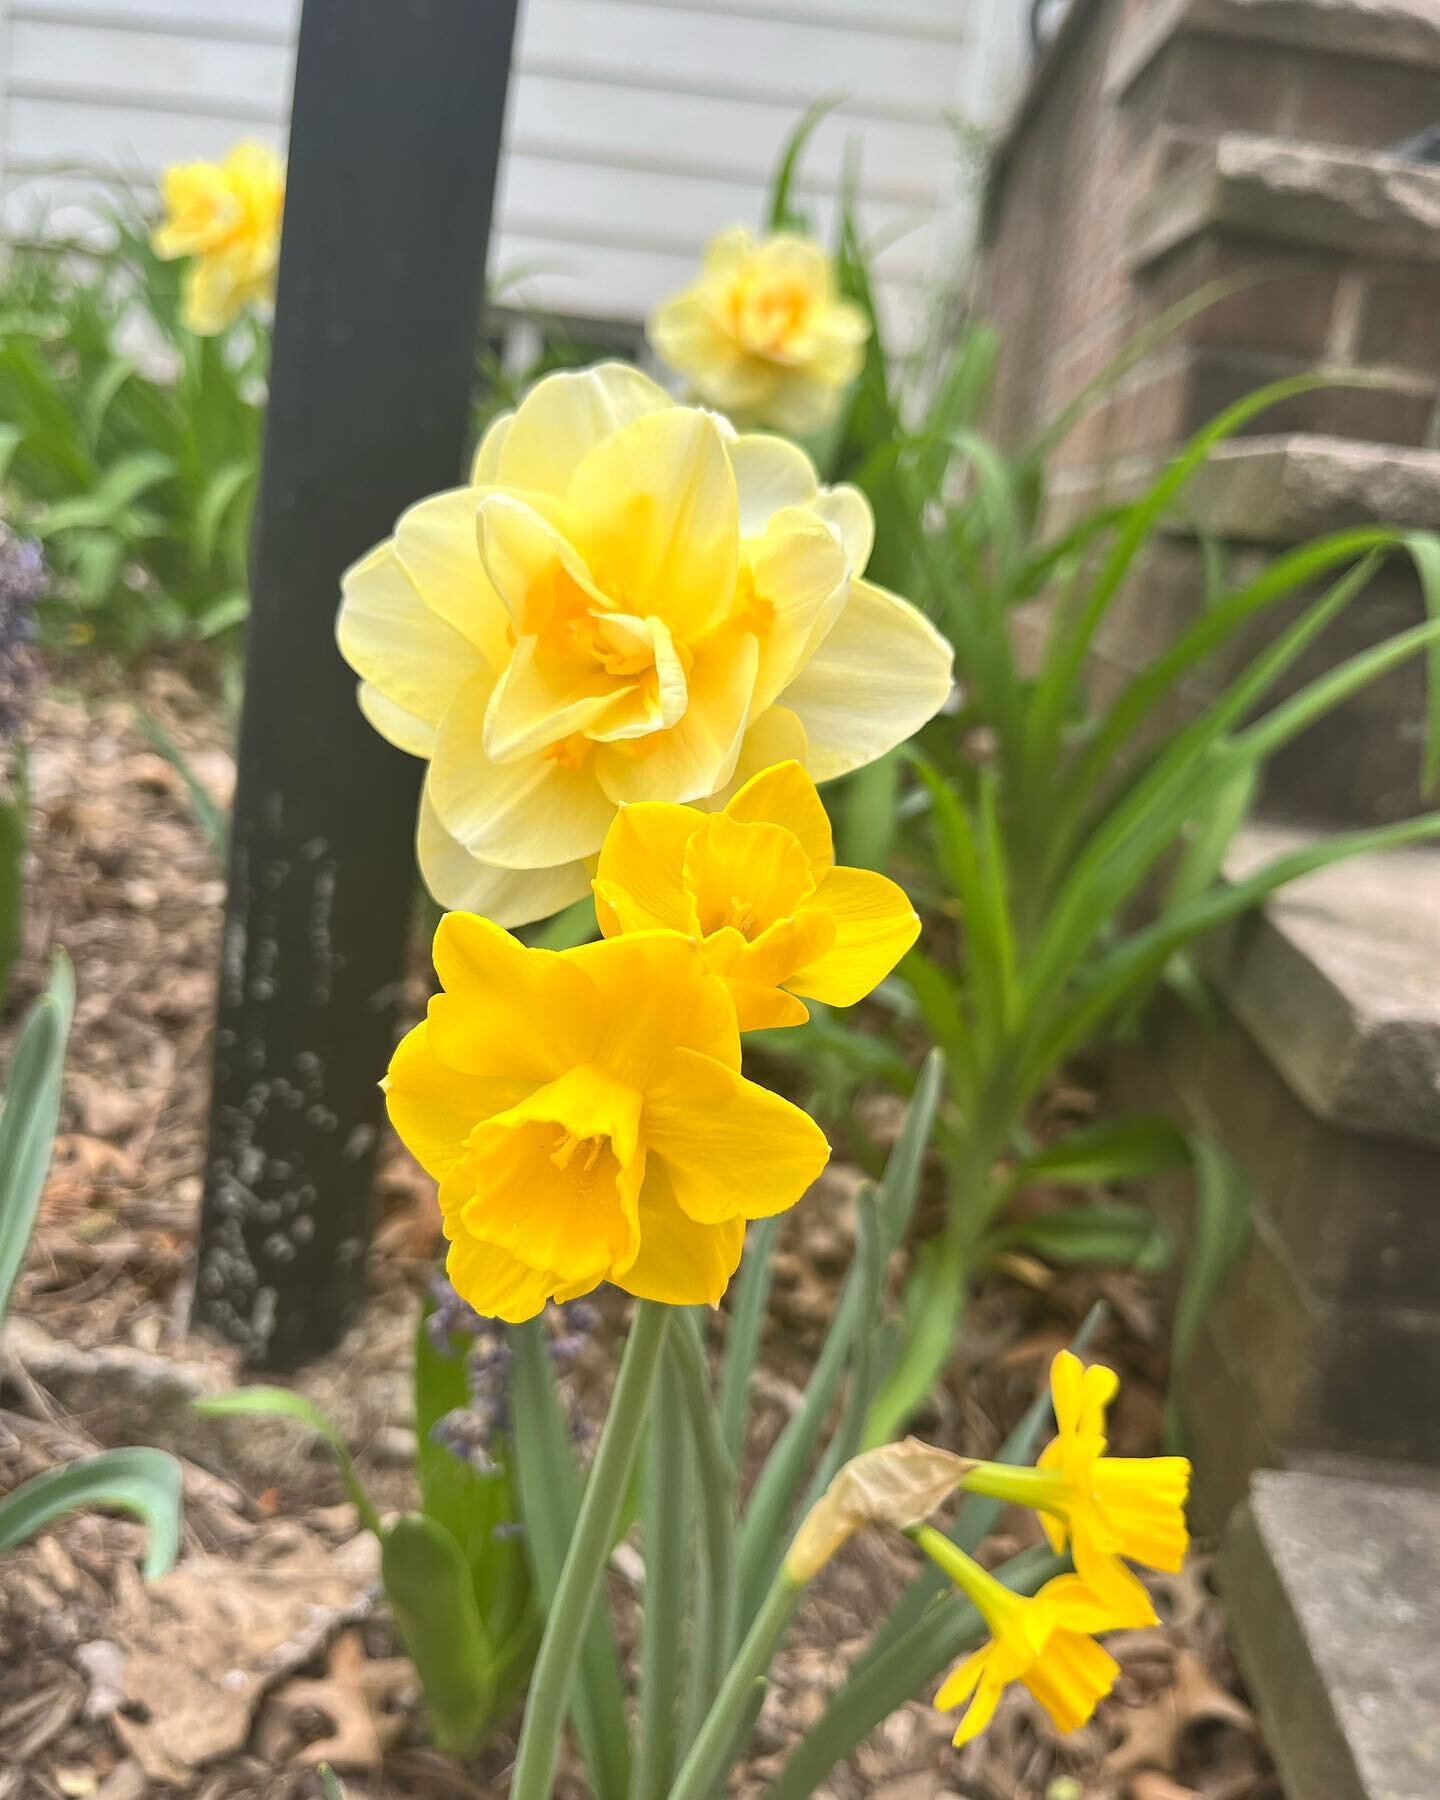 April Garden 💛 Zone 7
Something about yellow in the garden screams SPRING! I&rsquo;m not sure if it&rsquo;s because the forsythia is the first thing to bloom in my garden or because this yellow tulip was the first blooming plant Daniel ever bought f